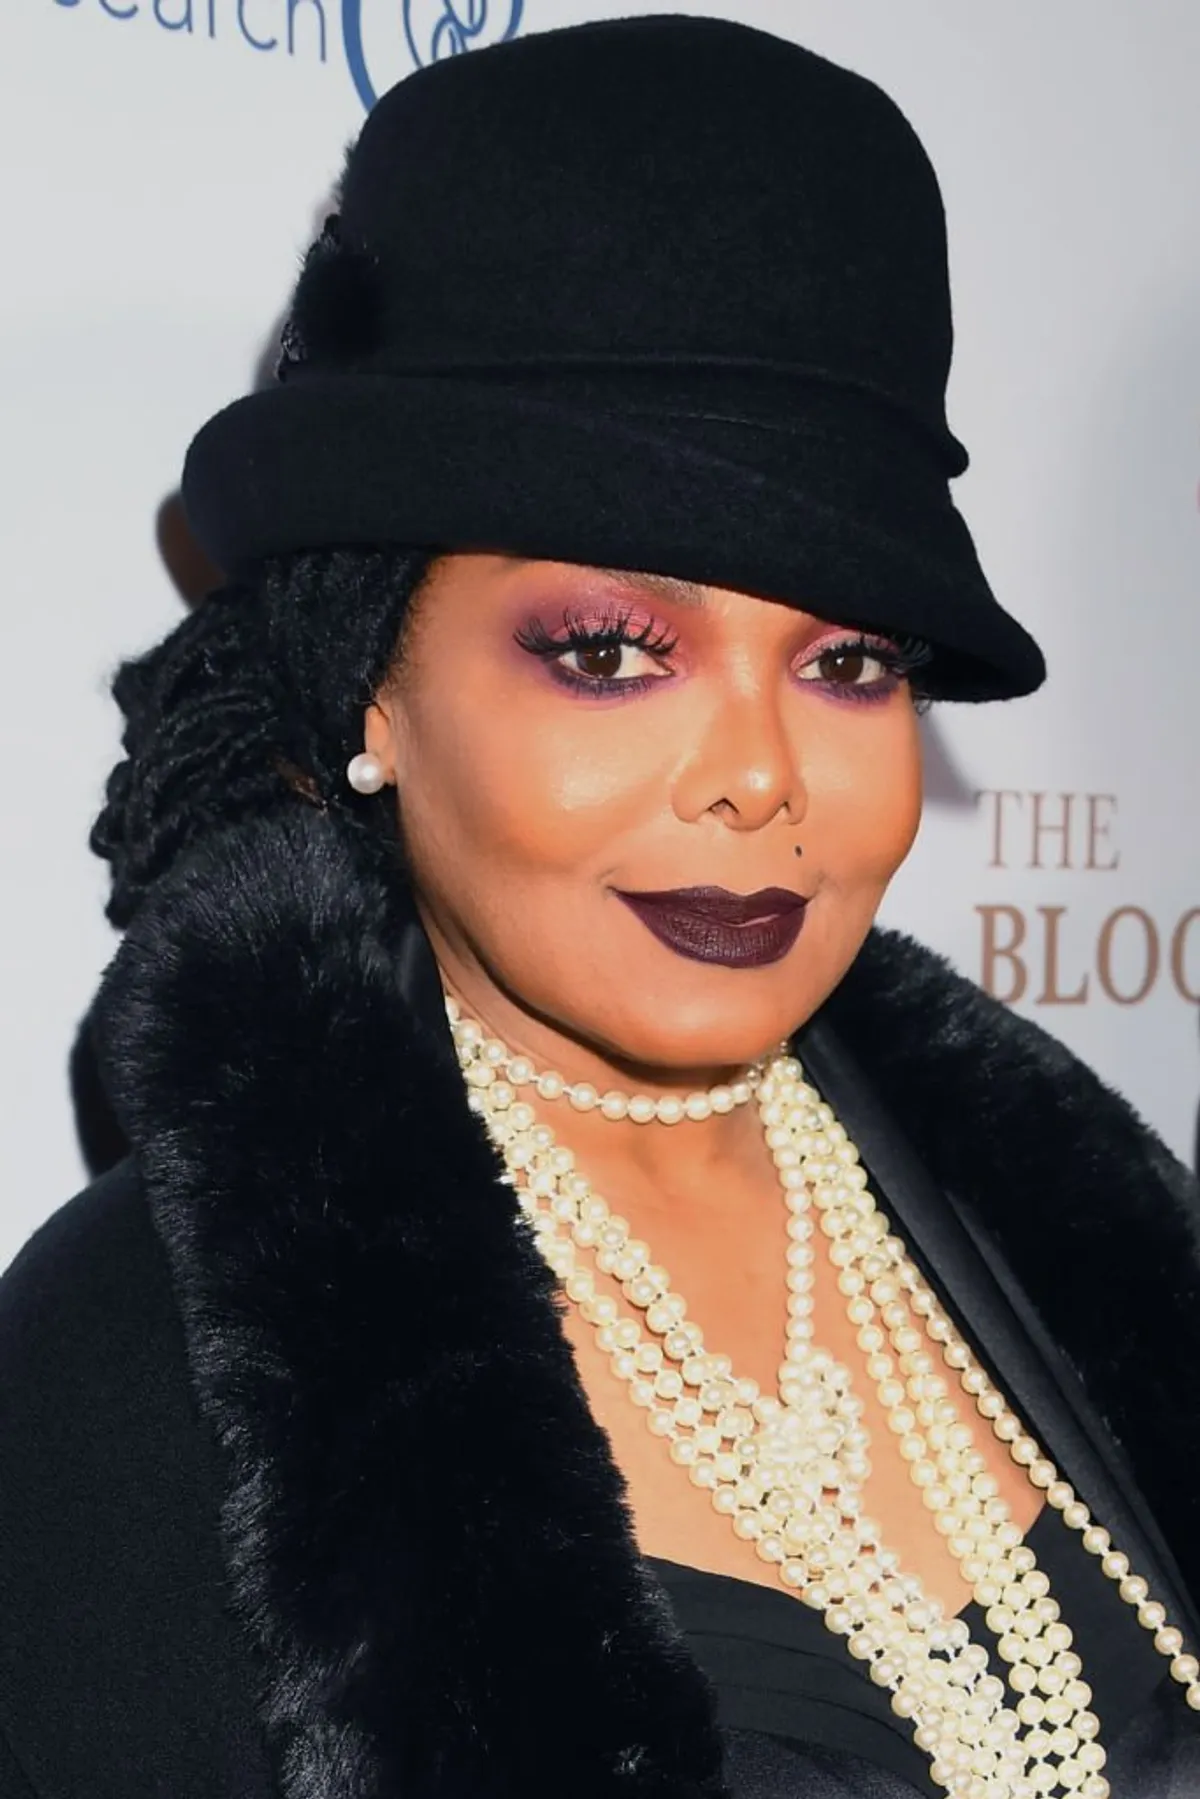 Janet Jackson attends the Gatsby Gala in London, England on January 30, 2020. | Photo: Getty Images